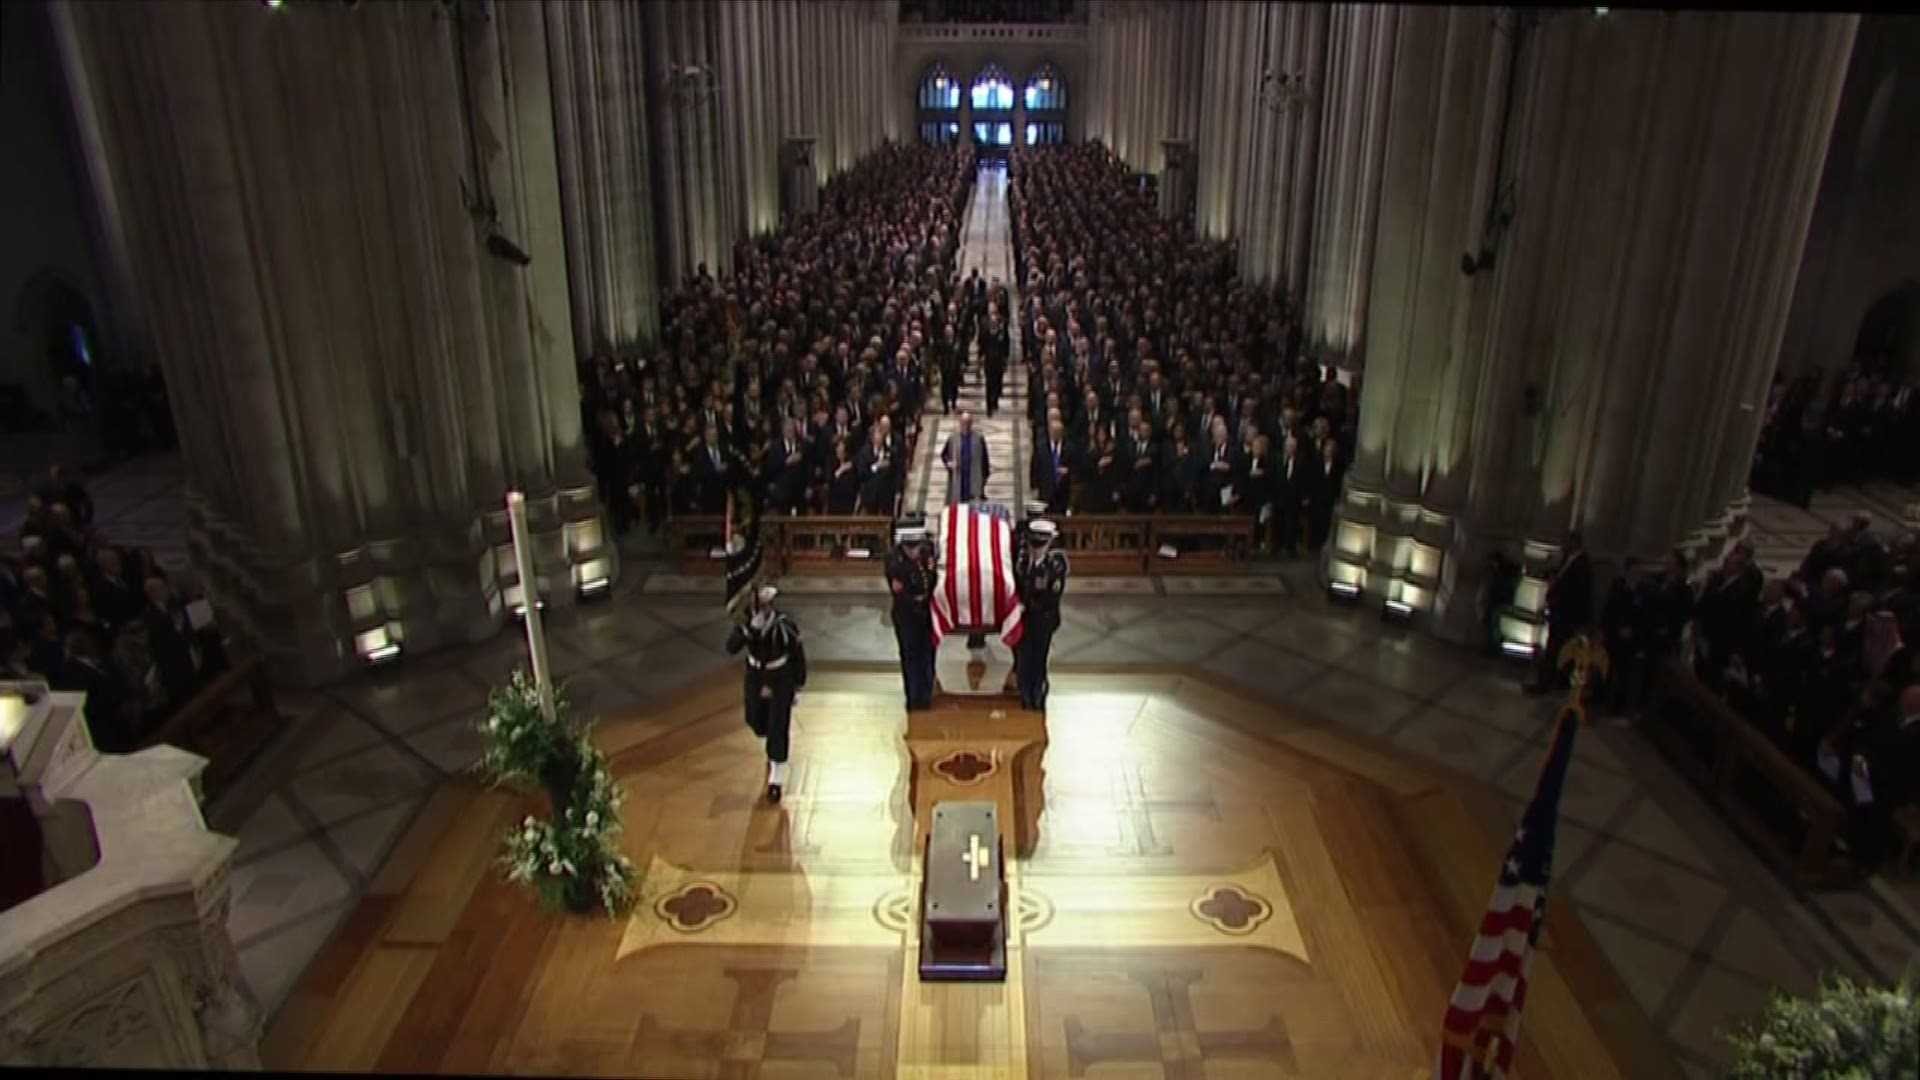 Former President George H.W. Bush was celebrated with praise and humor by friends and family during a state funeral at National Cathedral in Washington, D.C.